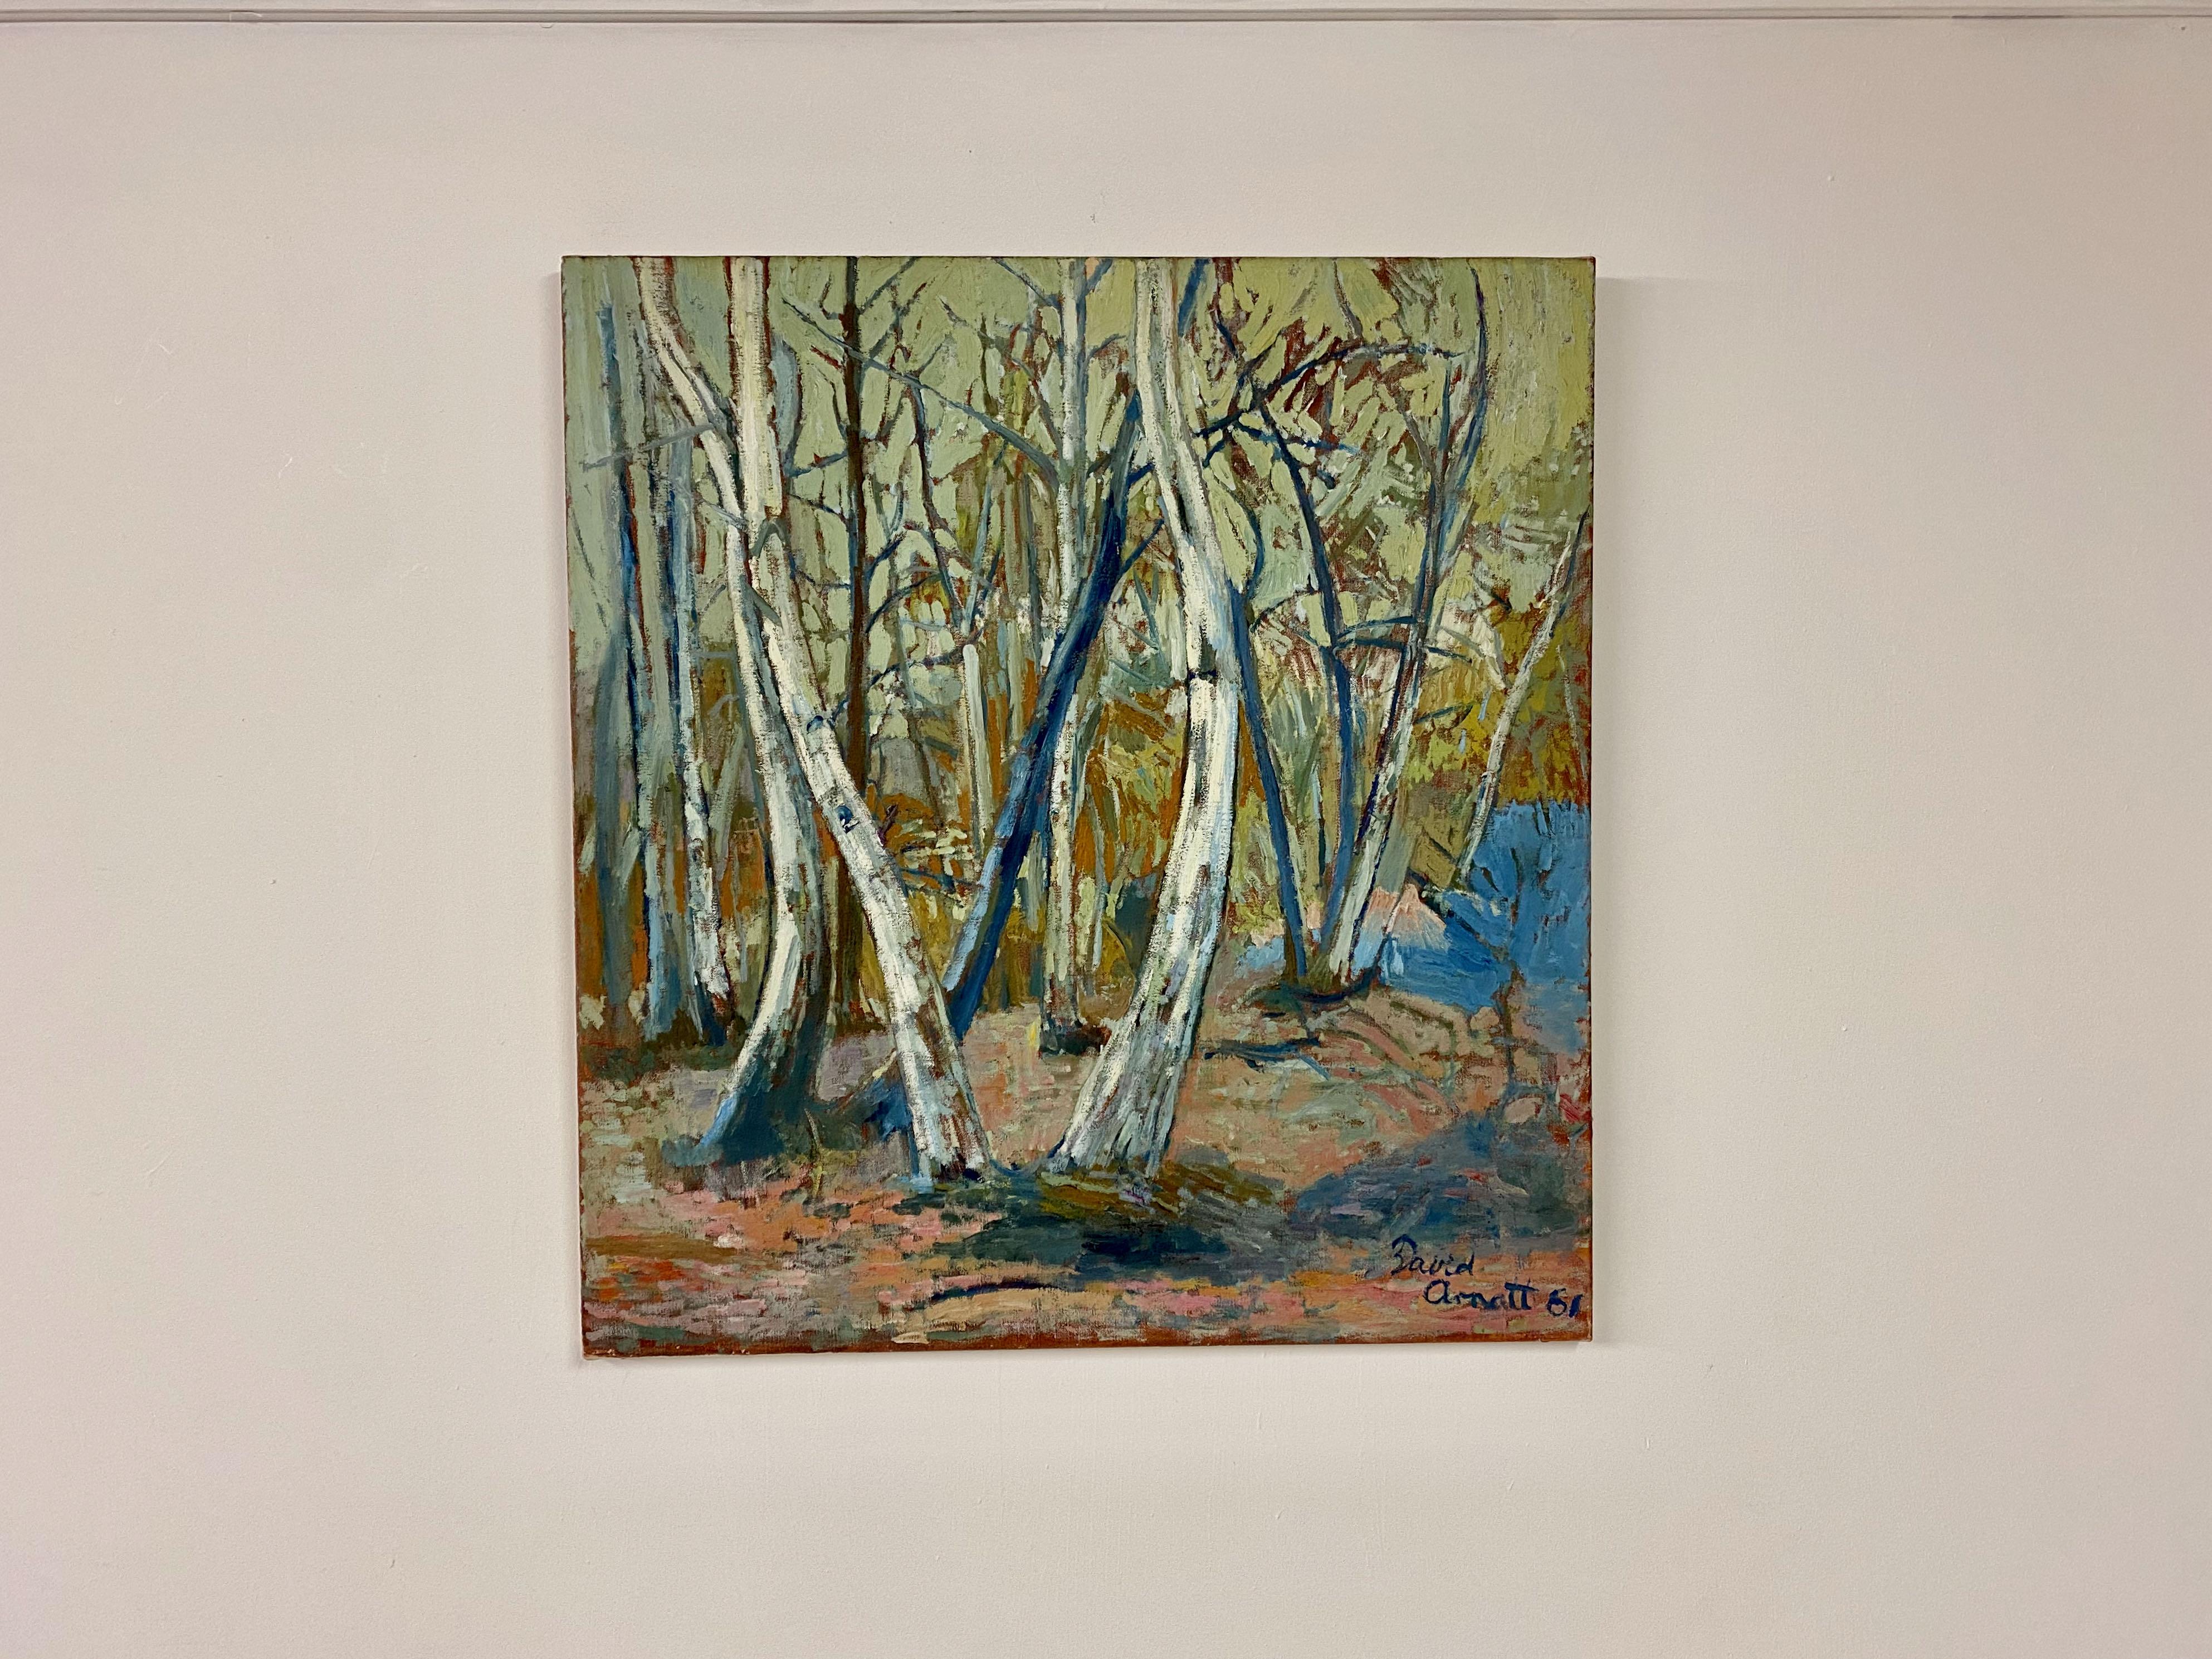 Oil on canvas

Expressionist style

Trees in the wood

1960s.